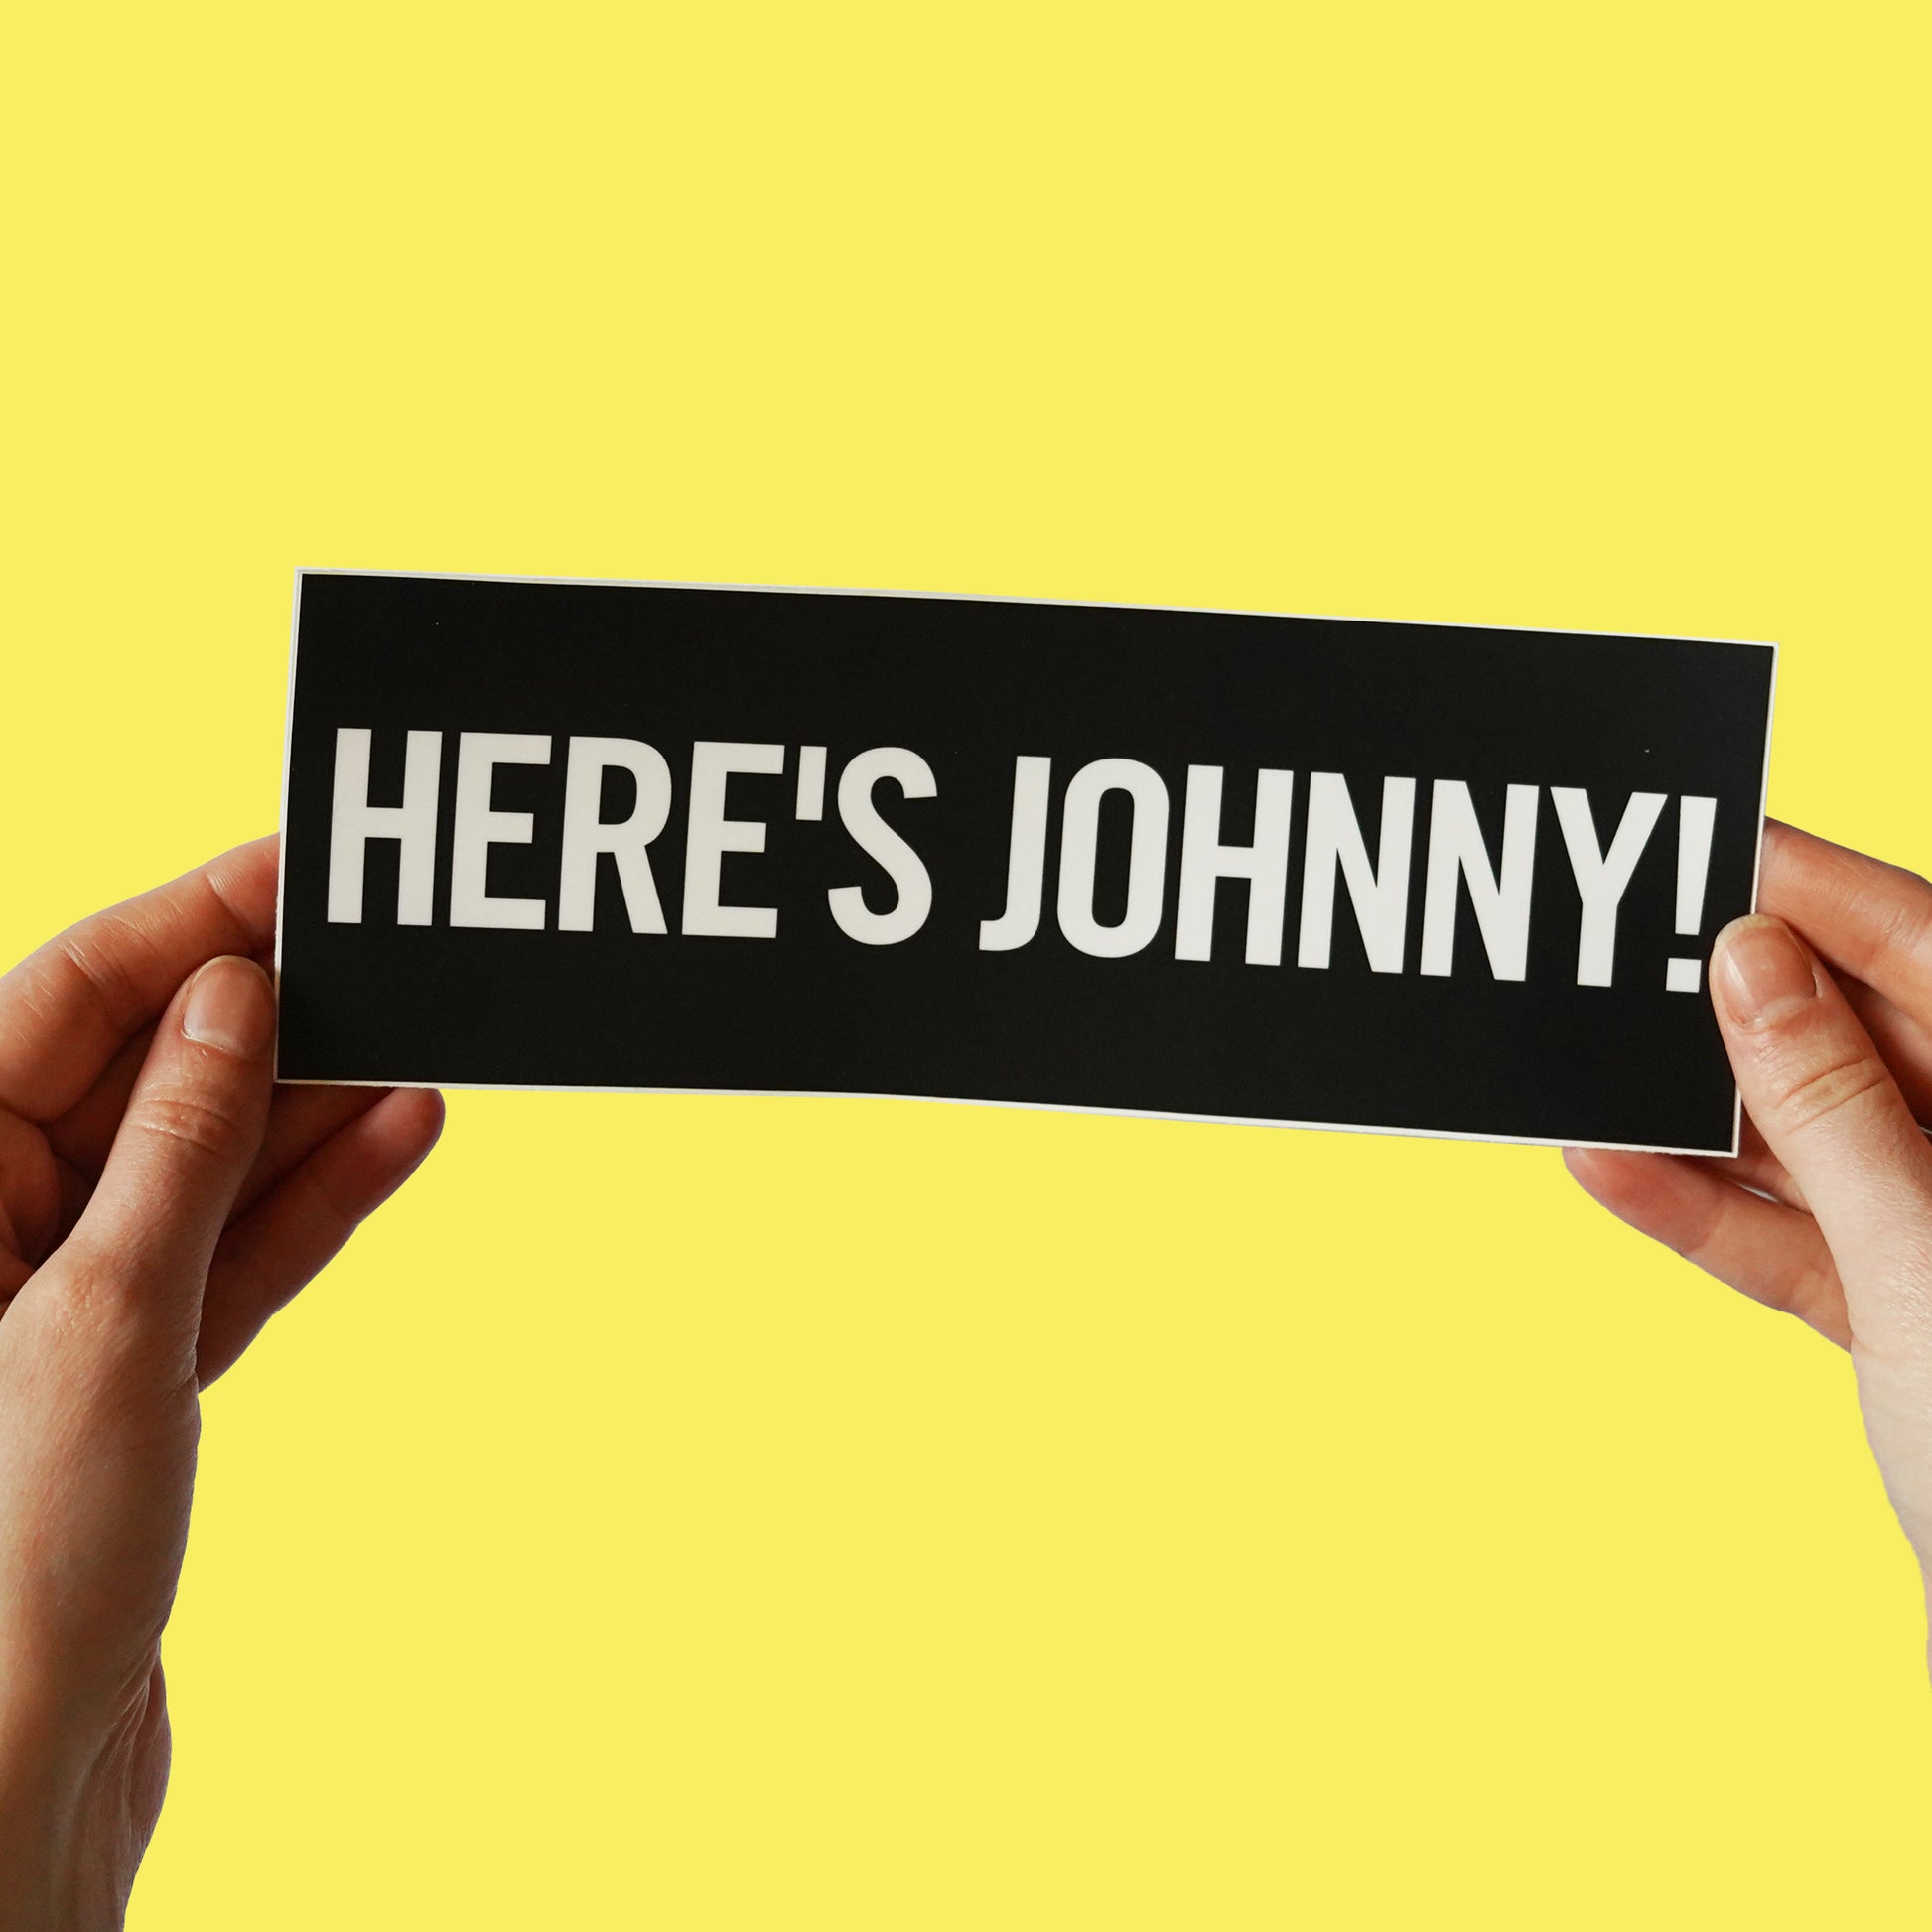 The Shining Quote Sticker, "Here's Johnny!"